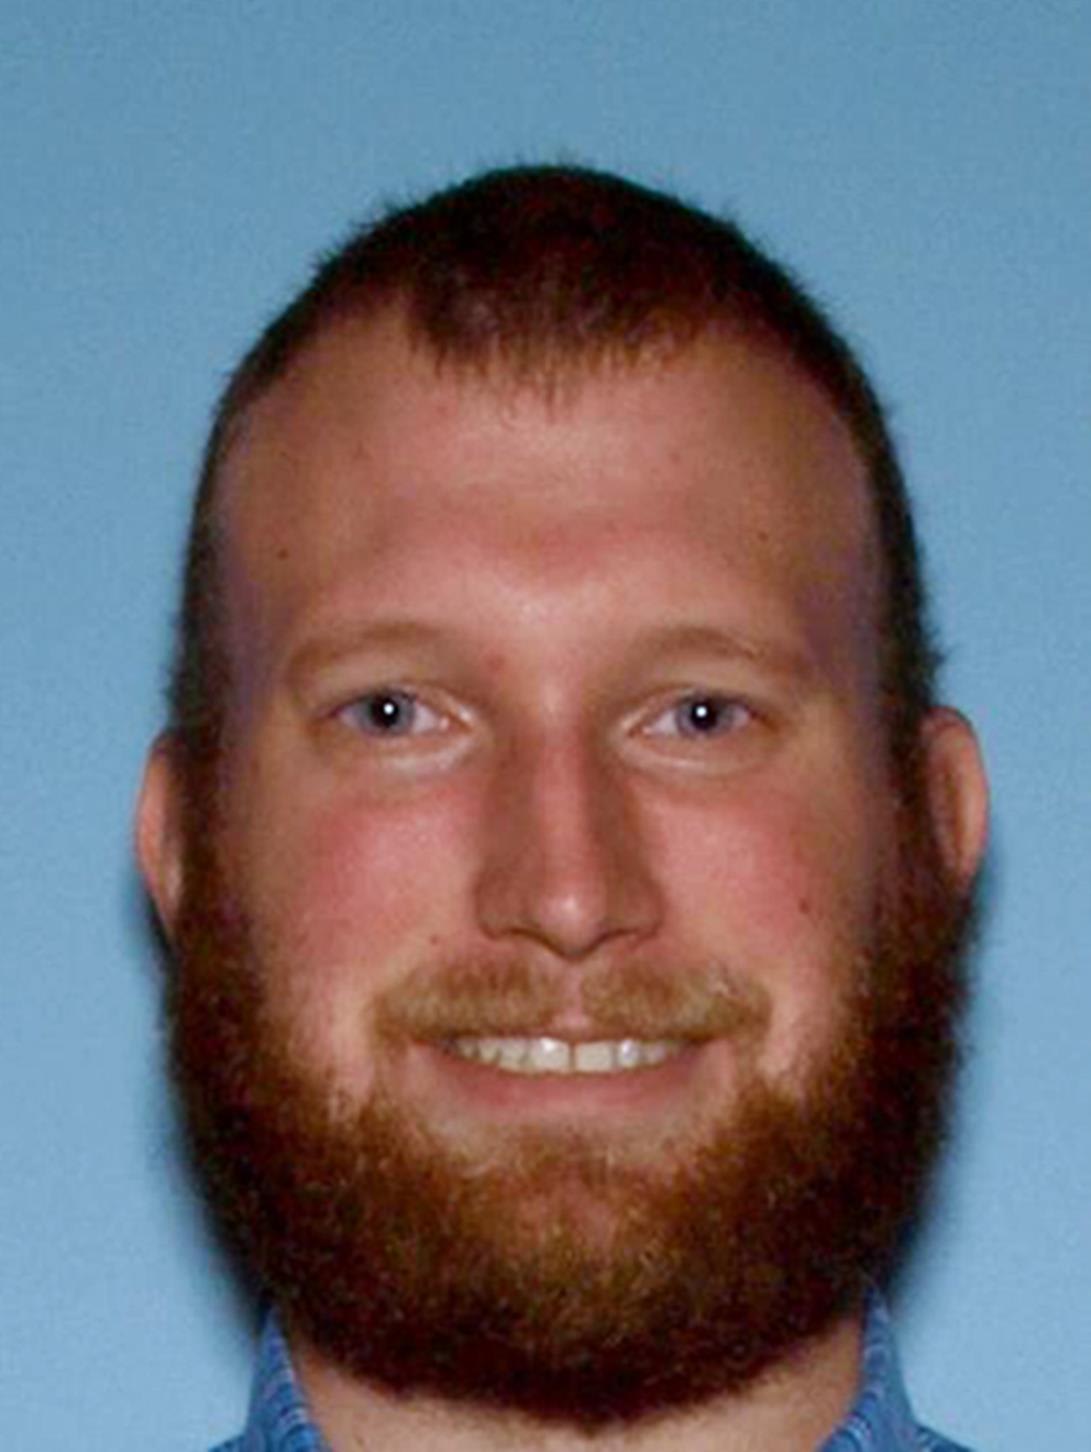 Thomas Jesse Lee Hunted After 5 Found Dead in LeGrange, Georgia: Cops